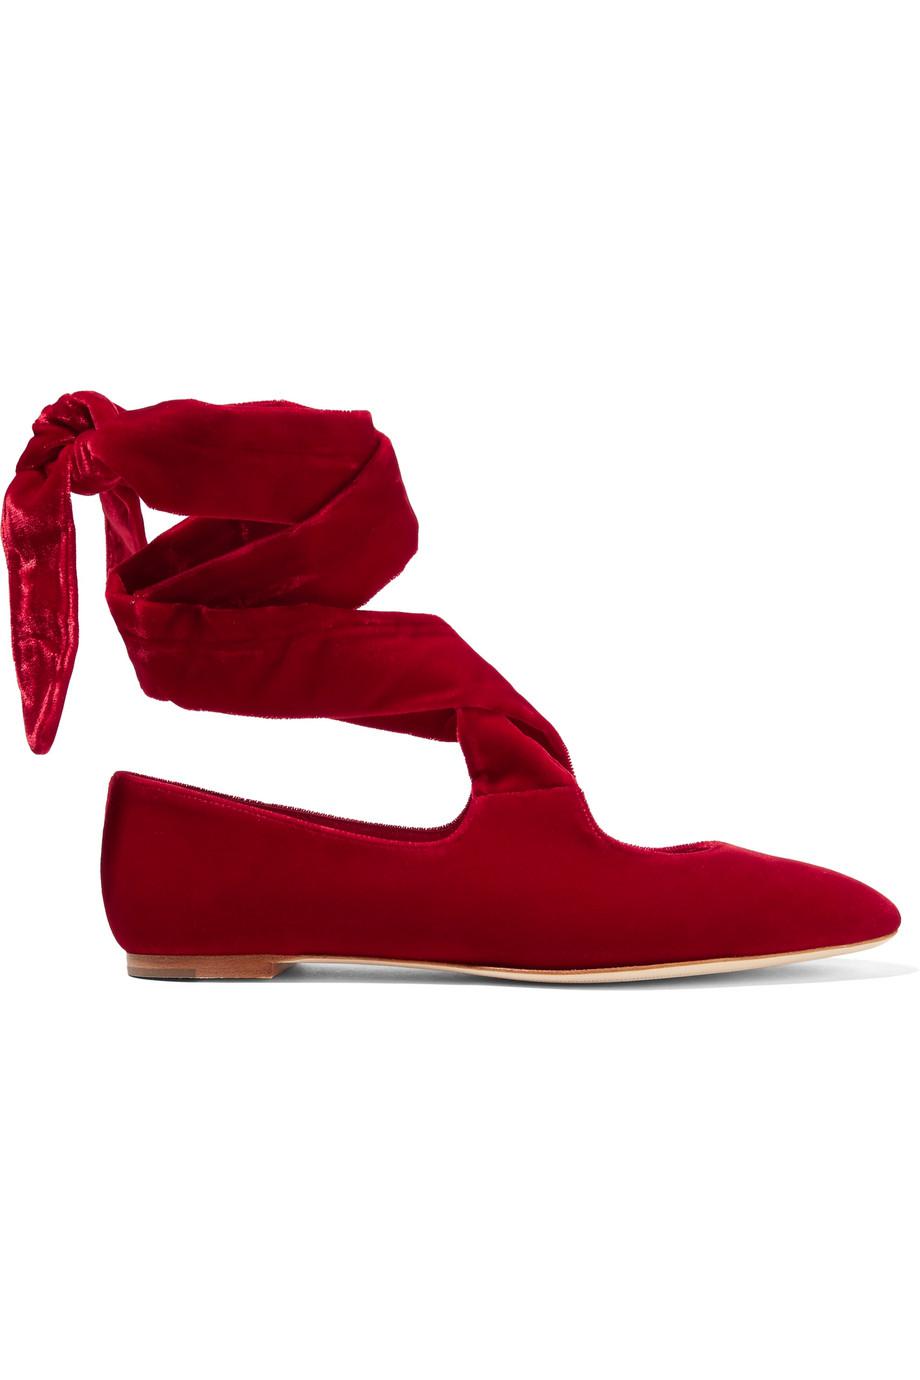 The Row Elodie Velvet Flats W/ Tags in Red | Lyst